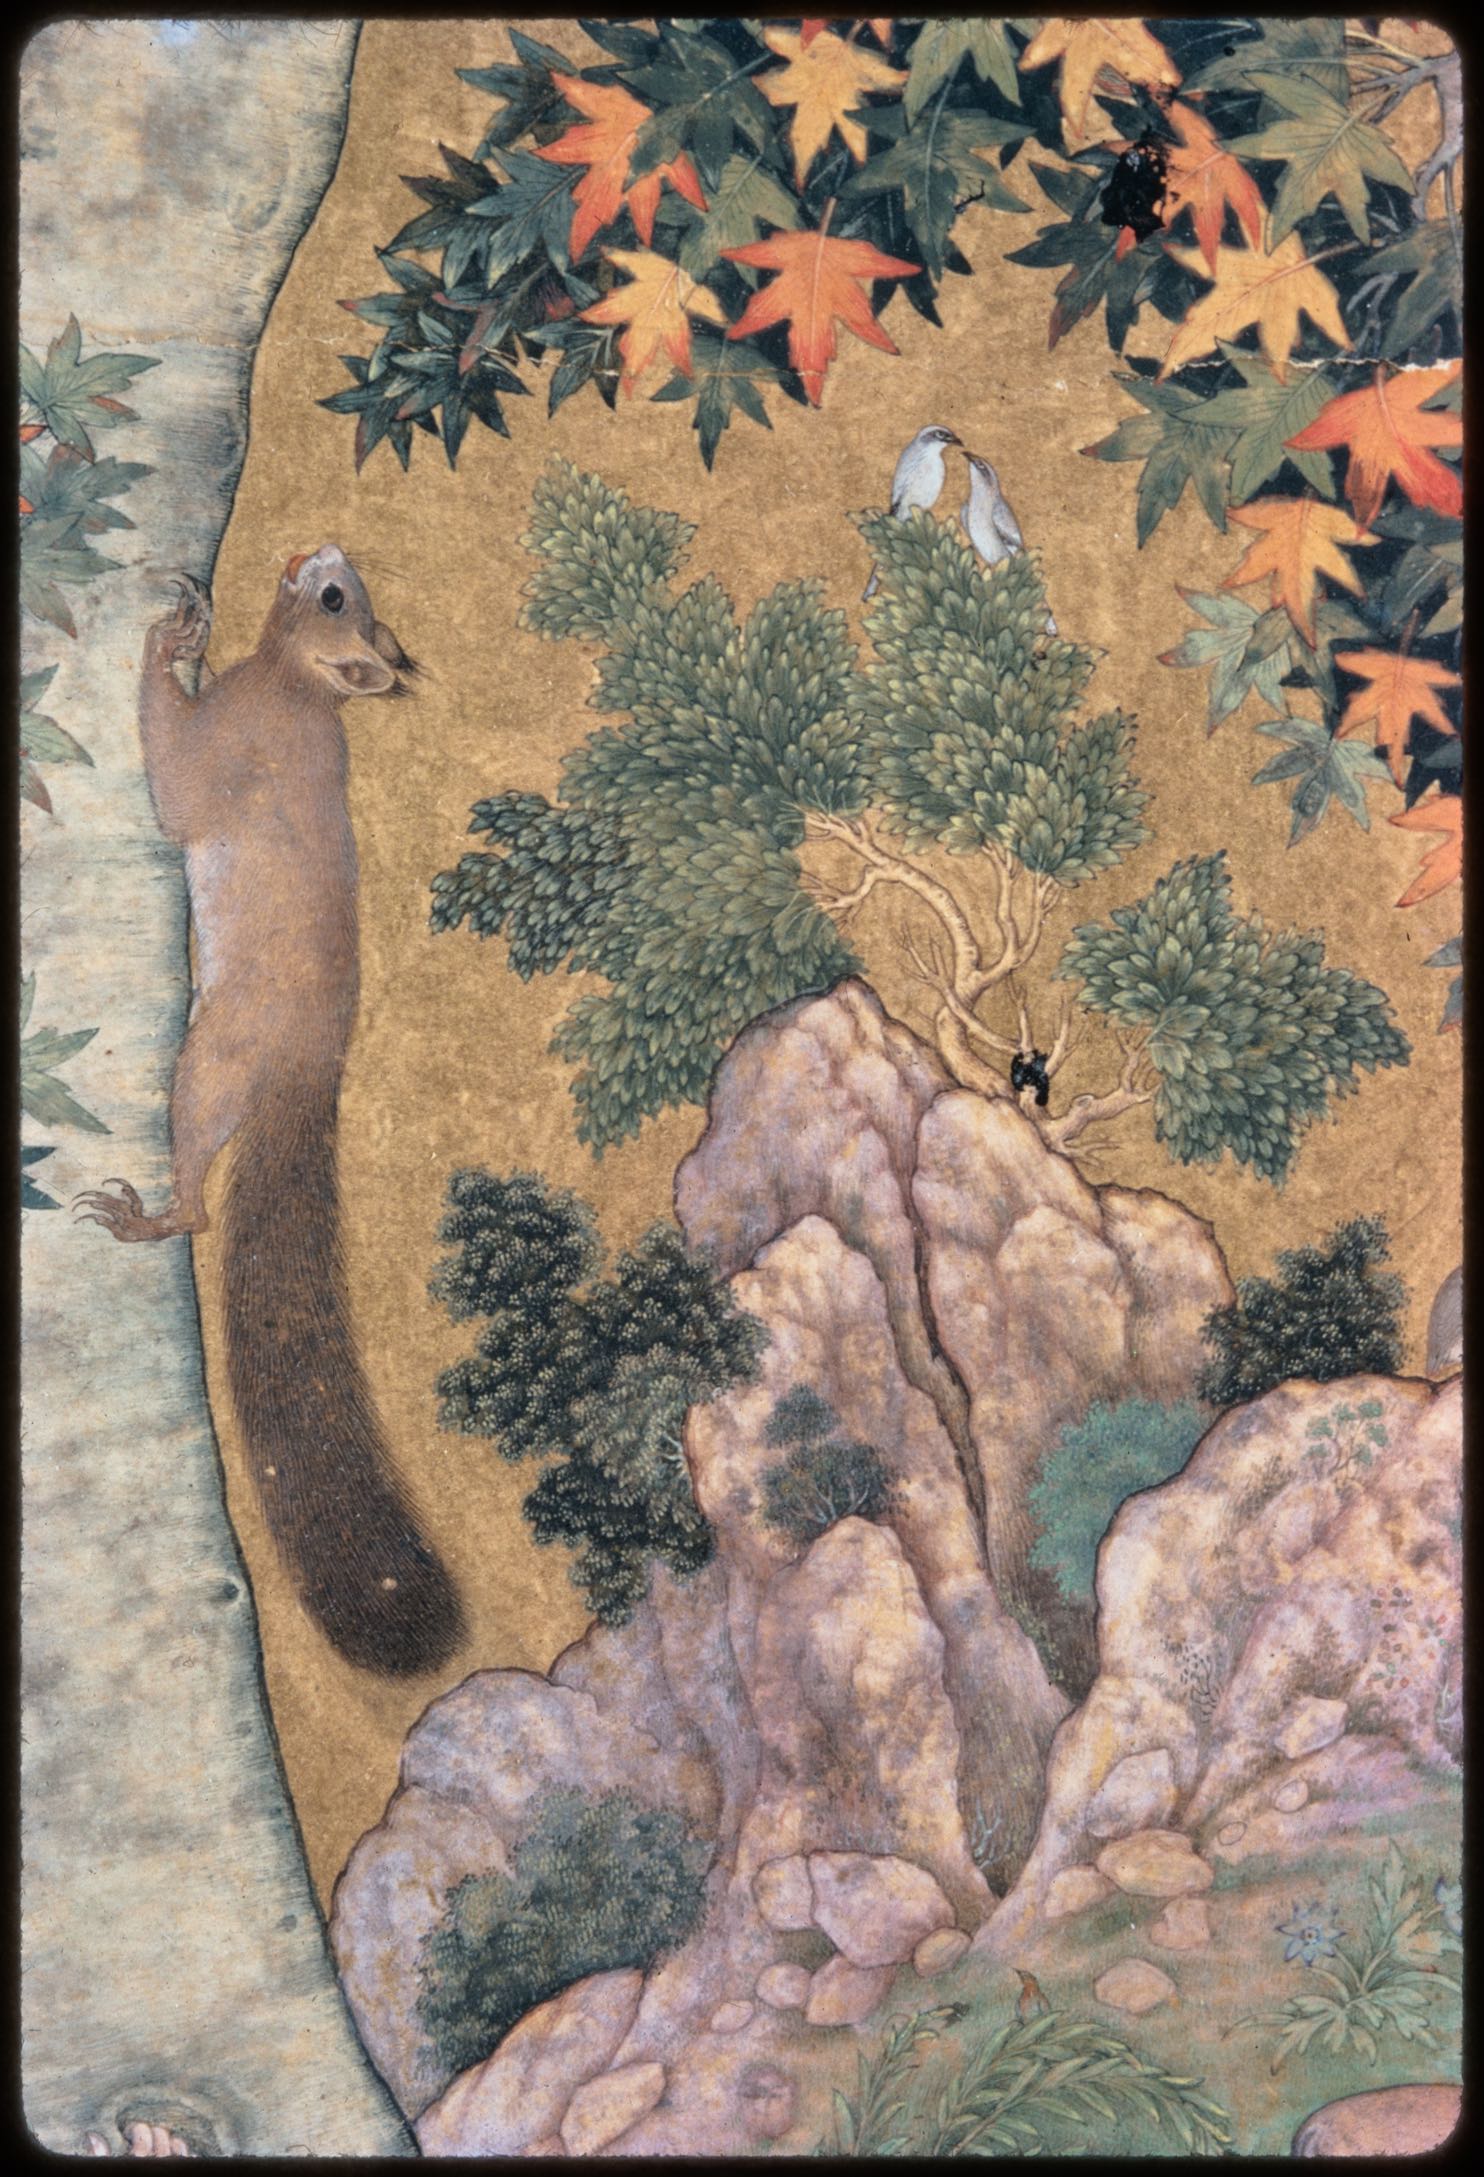 Detail of climbing squirrel with landscape, Squirrels in a Plane Tree (British Library, Johnson Album 1/30)